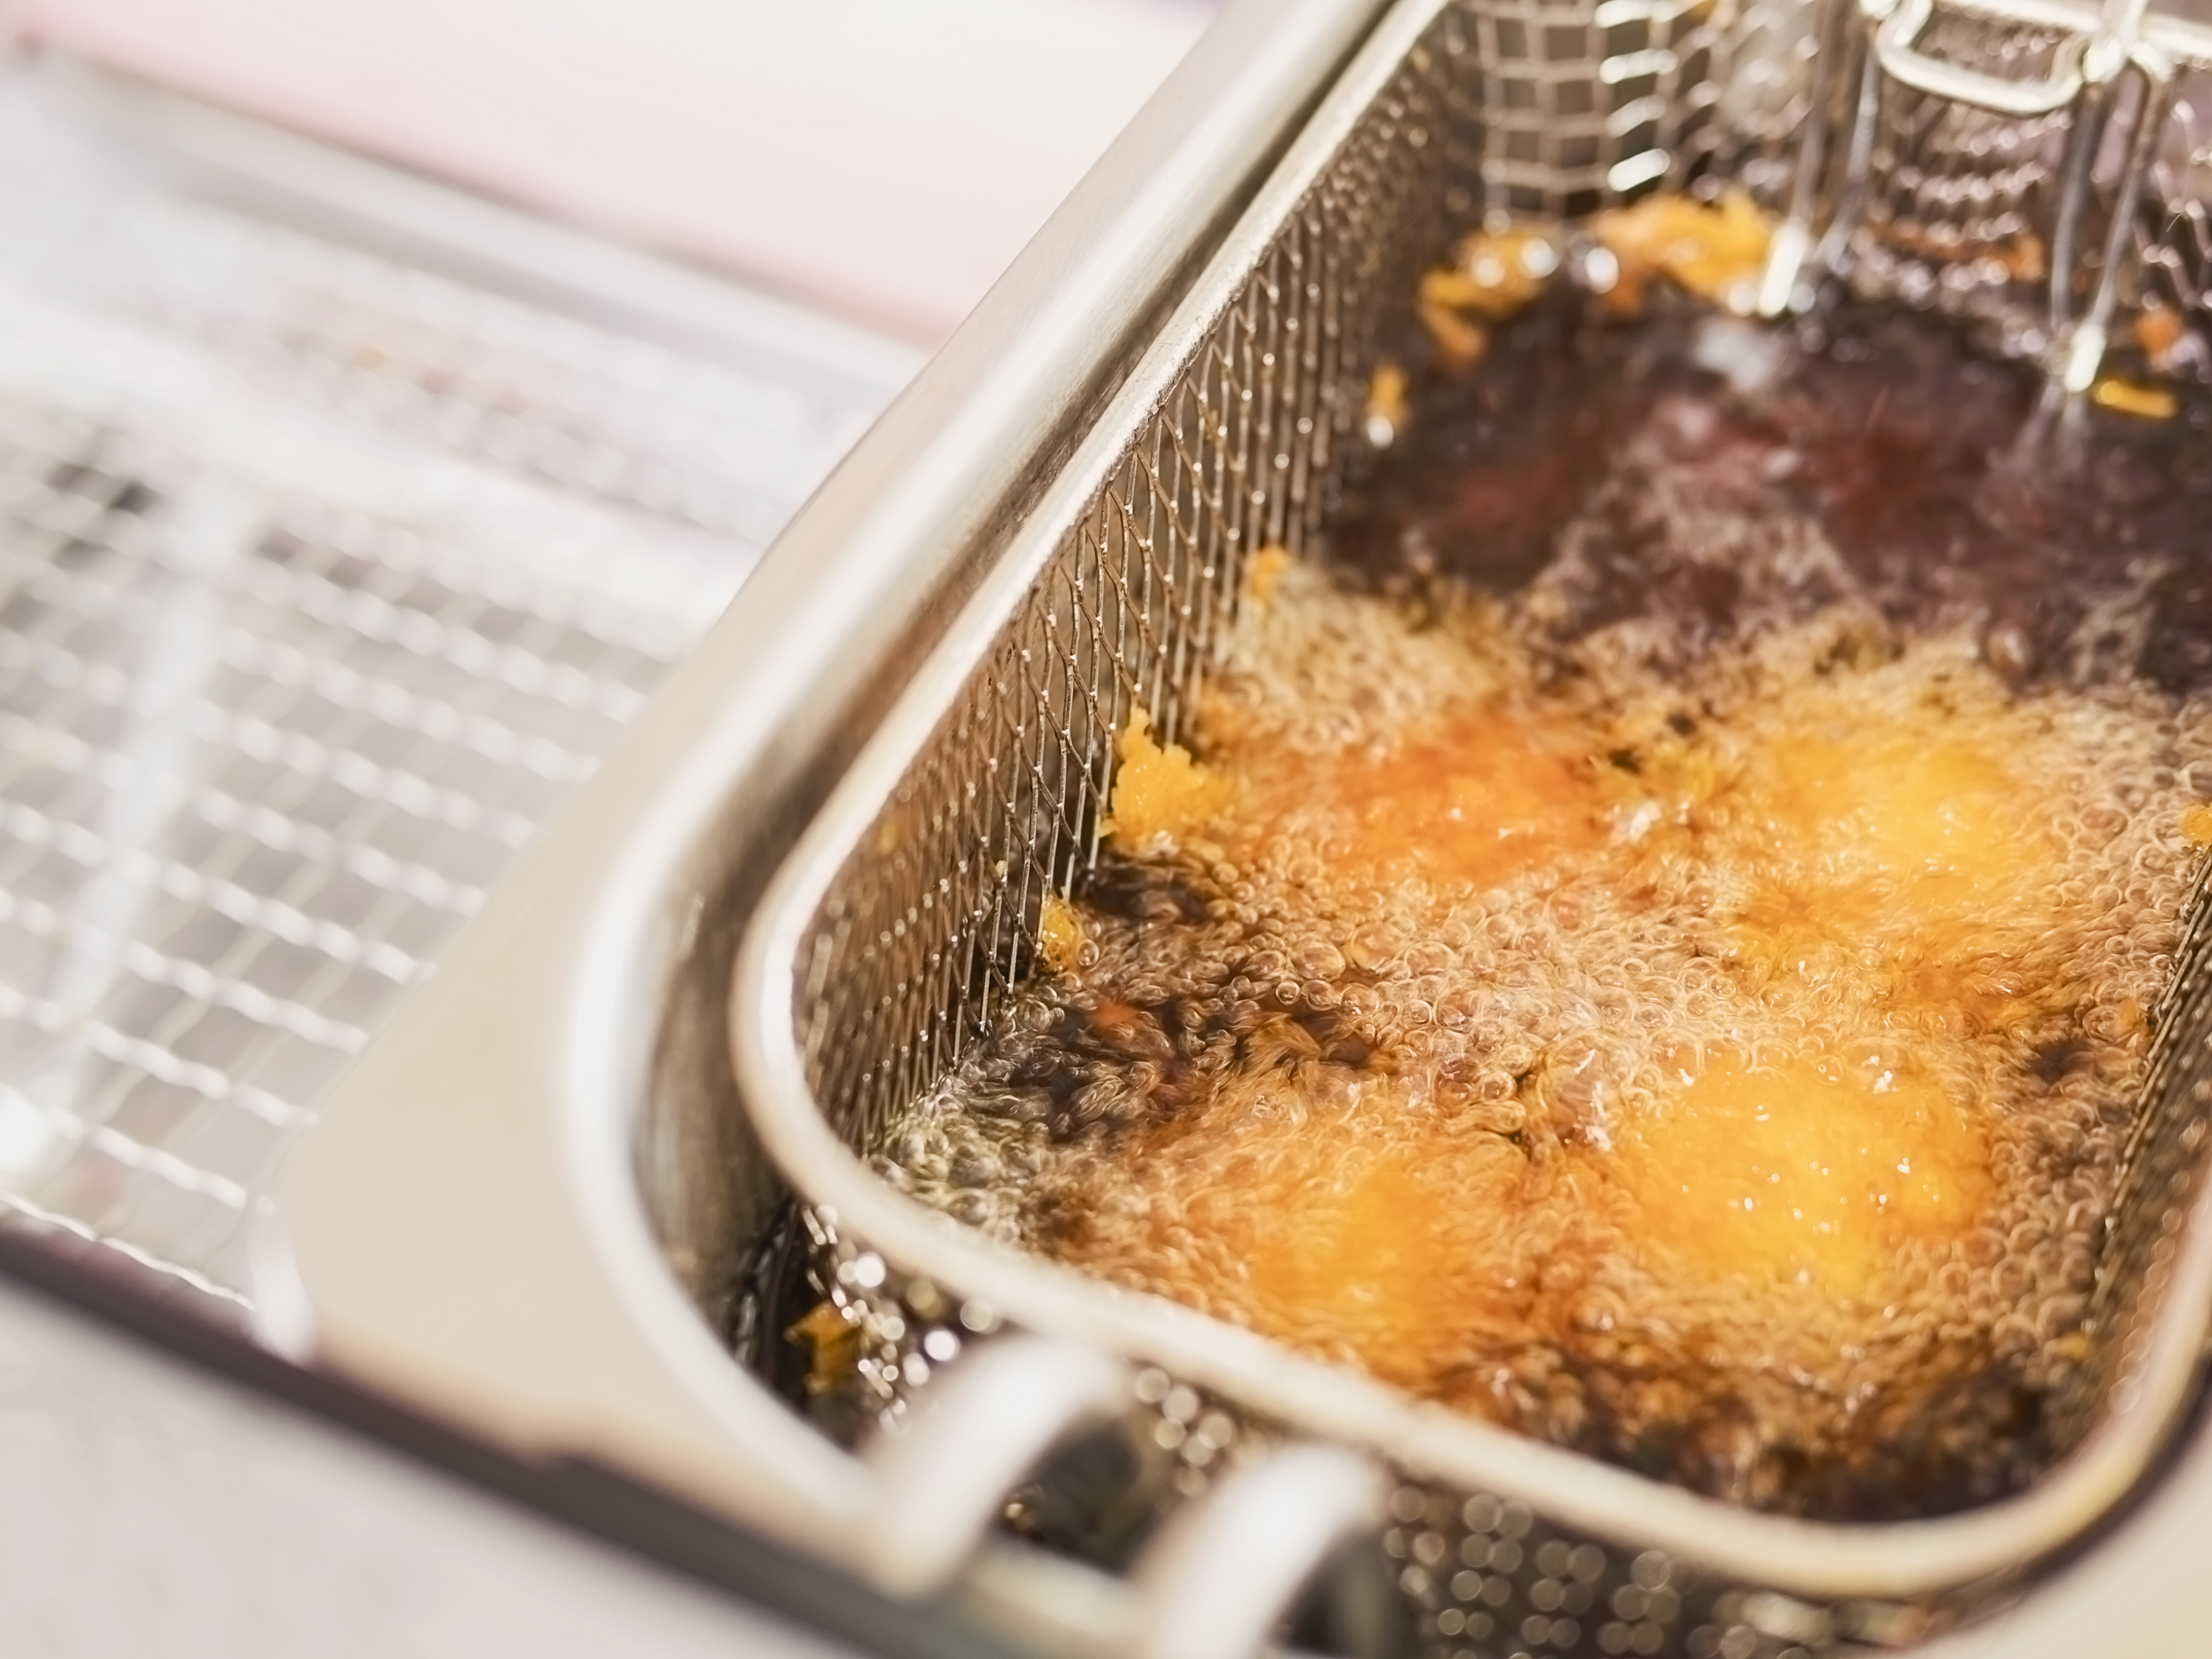 Frequent Reuse Of Frying Oil Linked To Mind Harm, Research Suggests